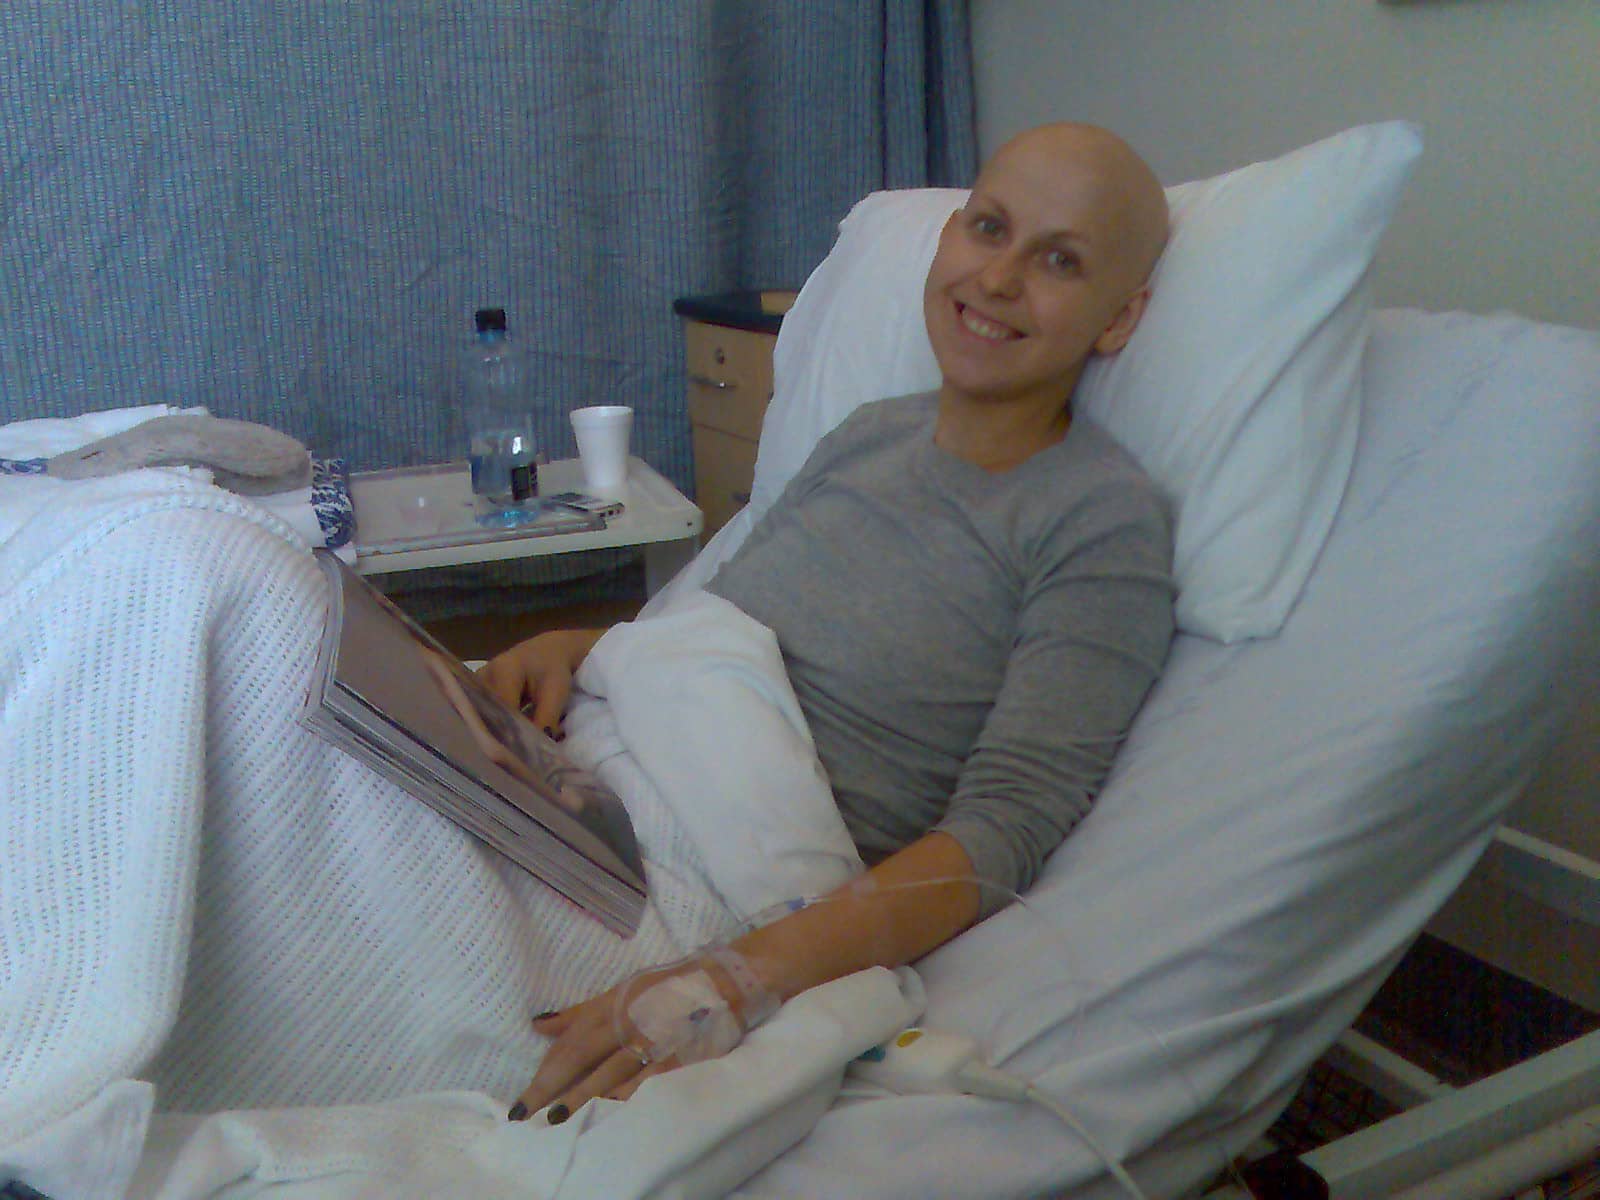 a cancer patient in a hospital bed smiling with a magazine on her lap